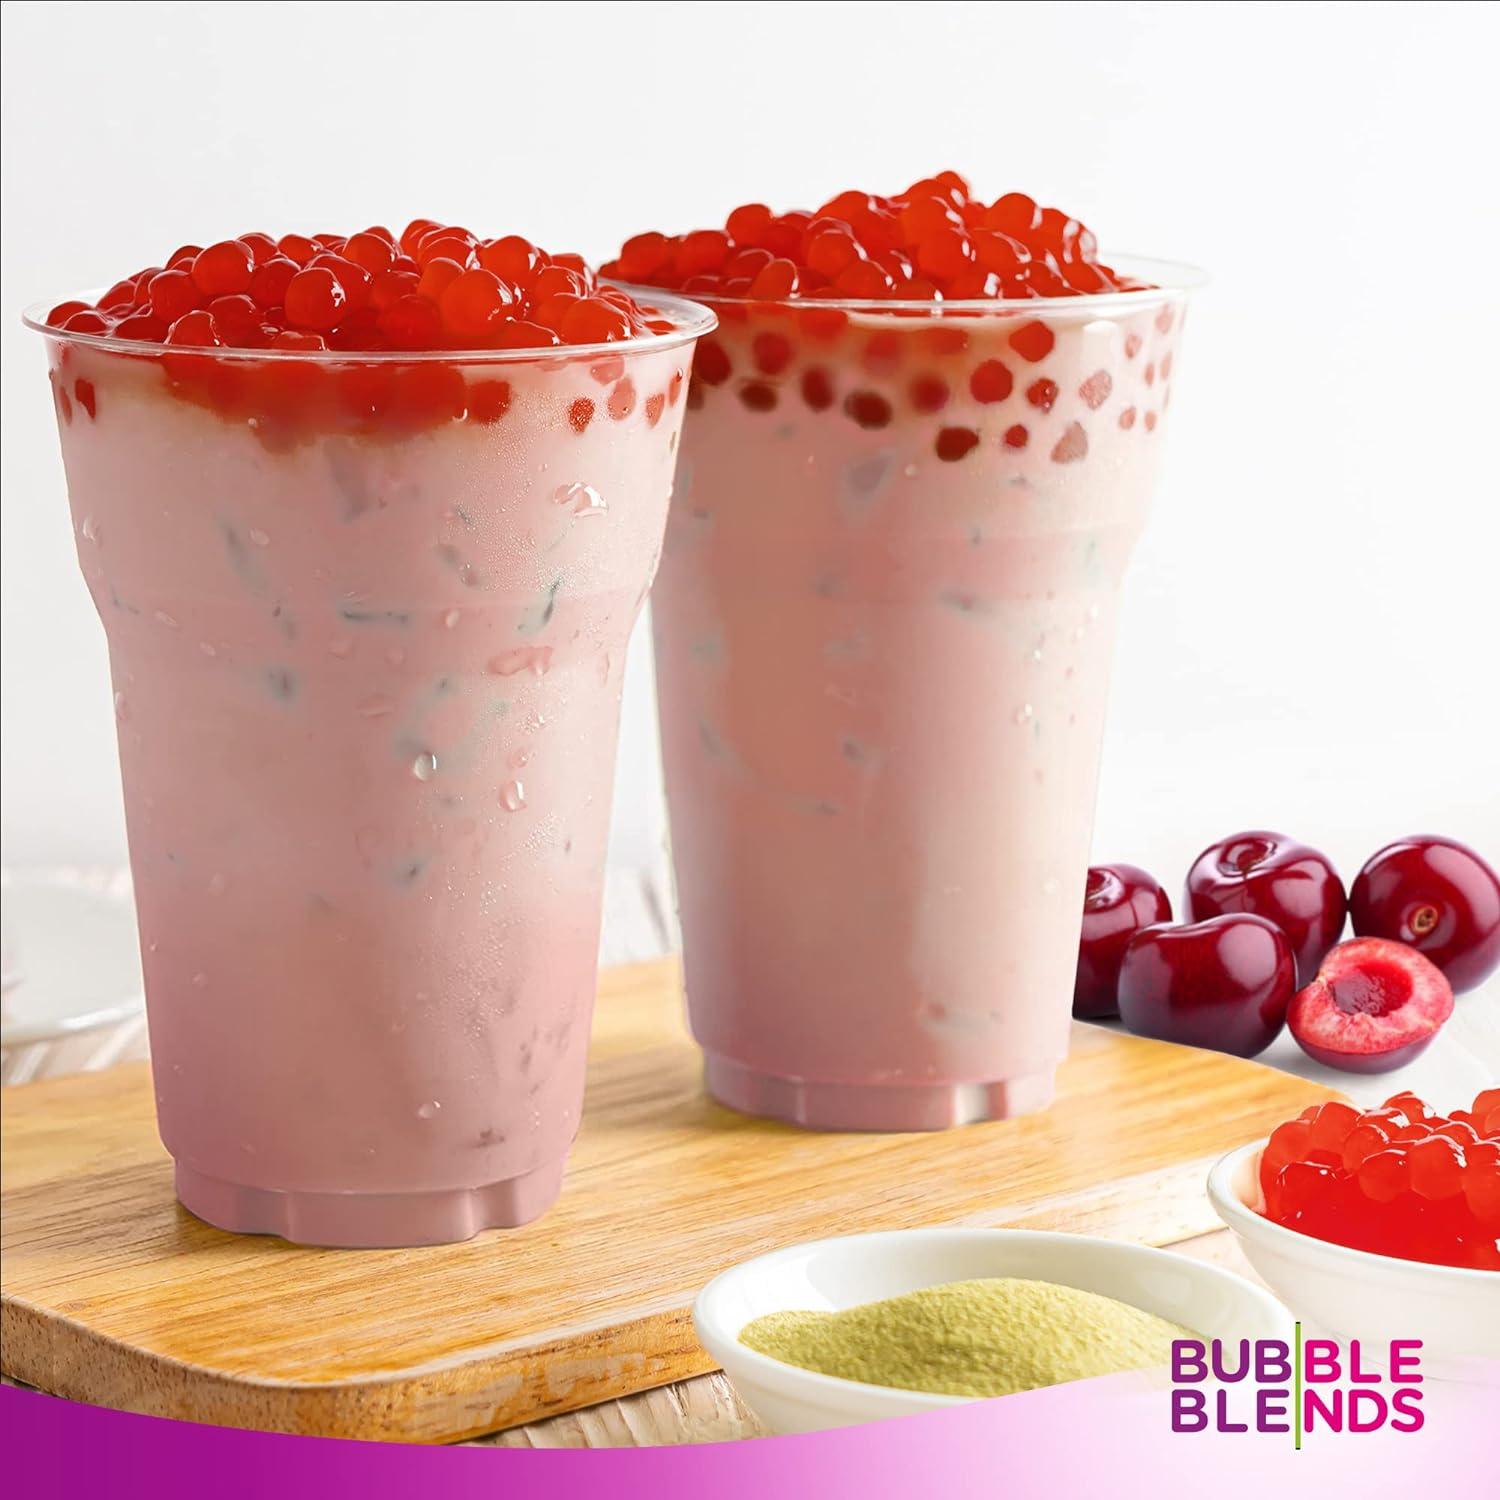 Bubble Blends Cherry Popping Boba (1kg) - Boba Balls with Real Fruit Juice  - 100% Fat-Free (Serves 10) - Boba Pearls for Bubble Tea Drink Sinkers or  Dessert Toppings 1kg (Pack of 1)